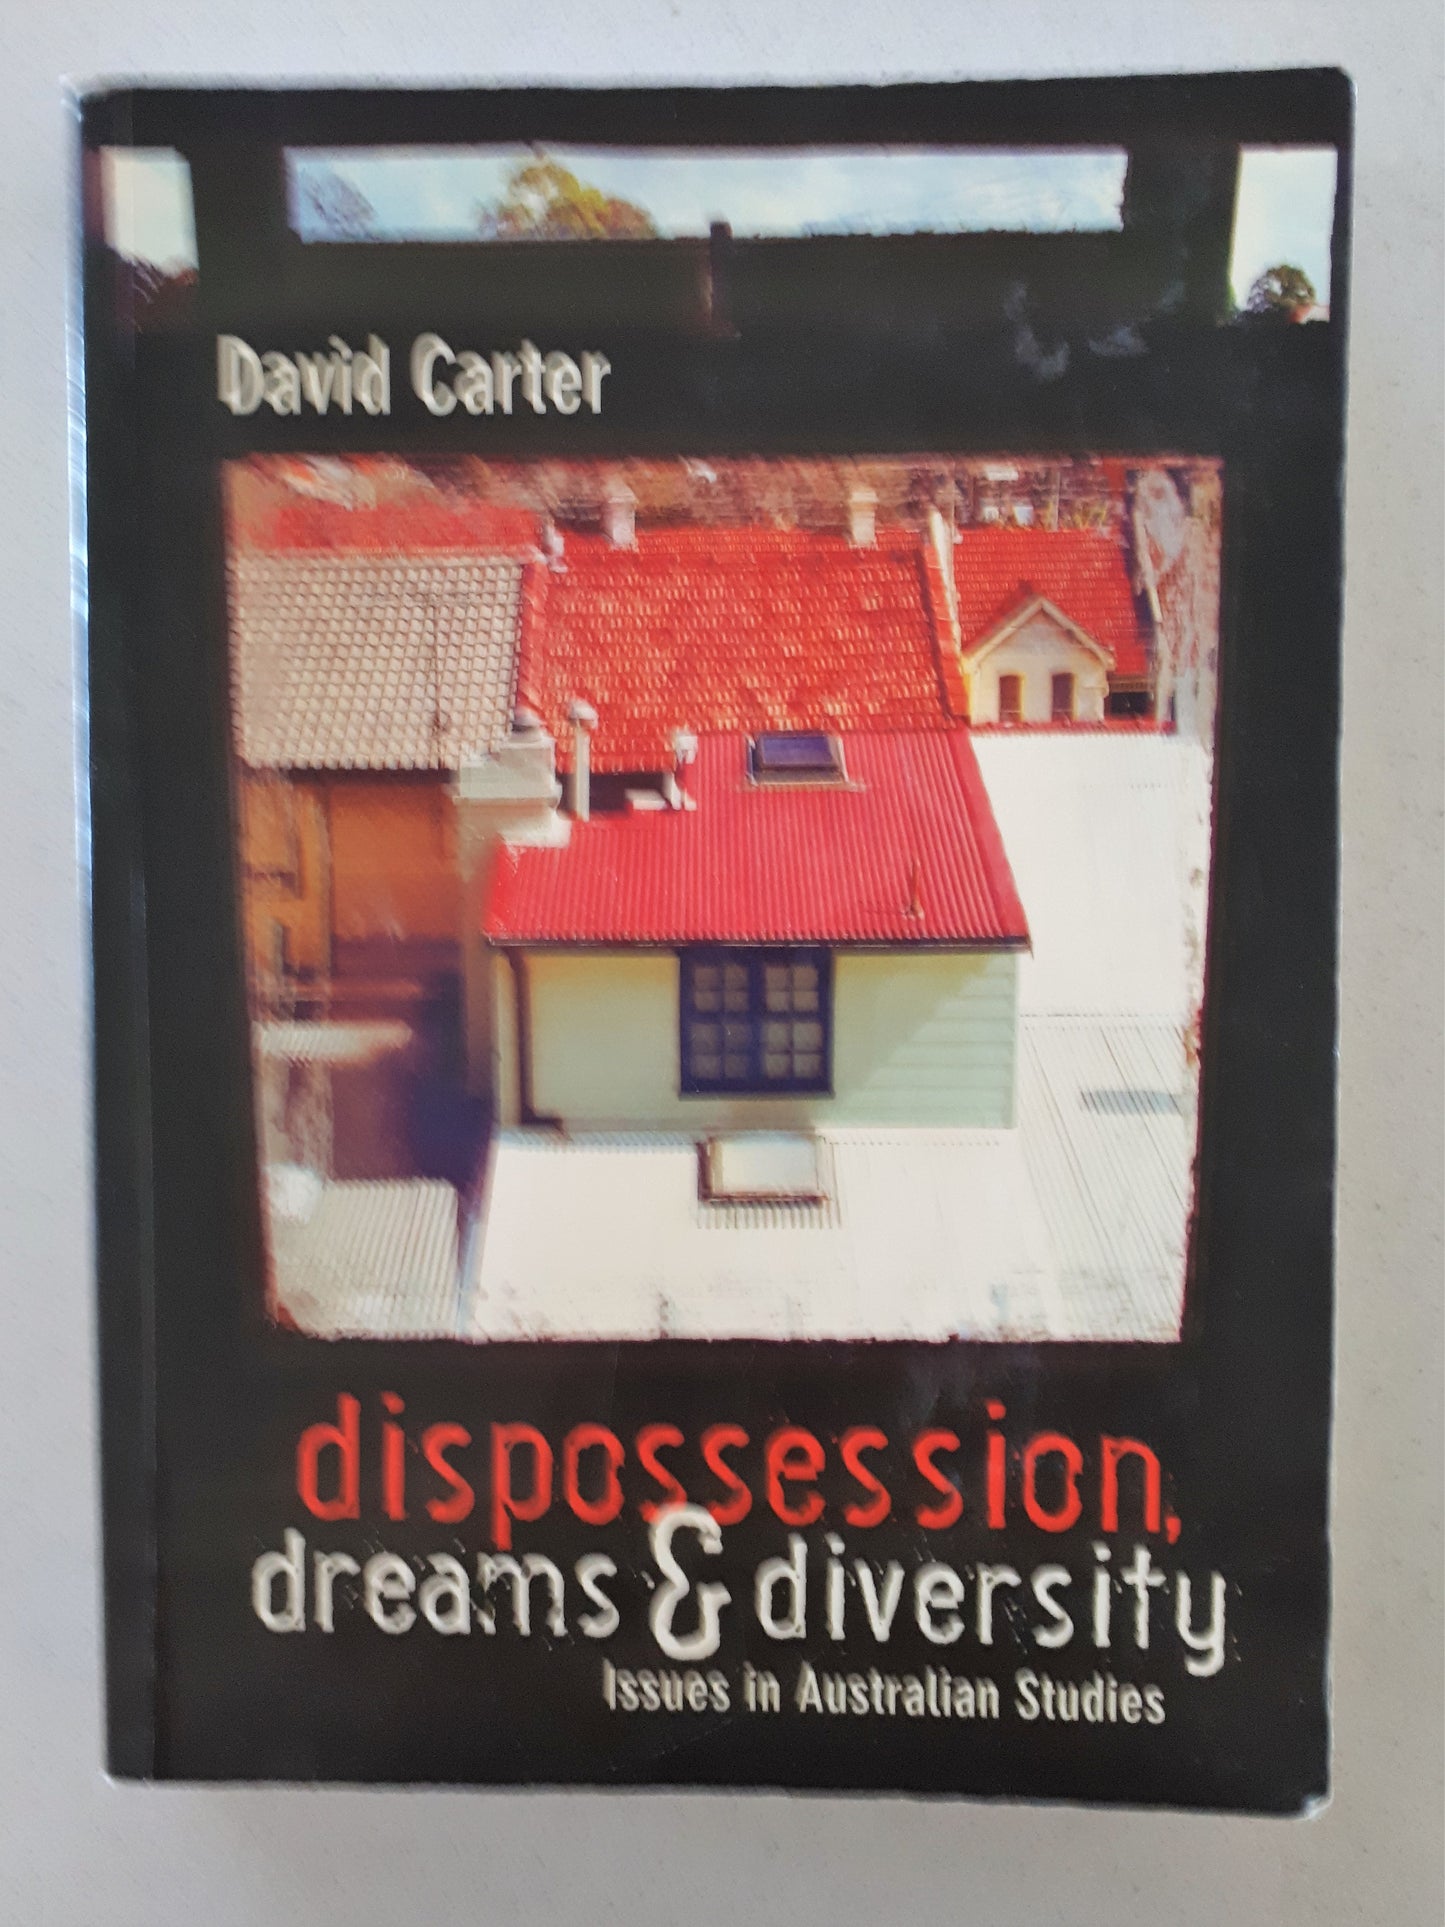 Dispossession, Dreams & Diversity by David Carter